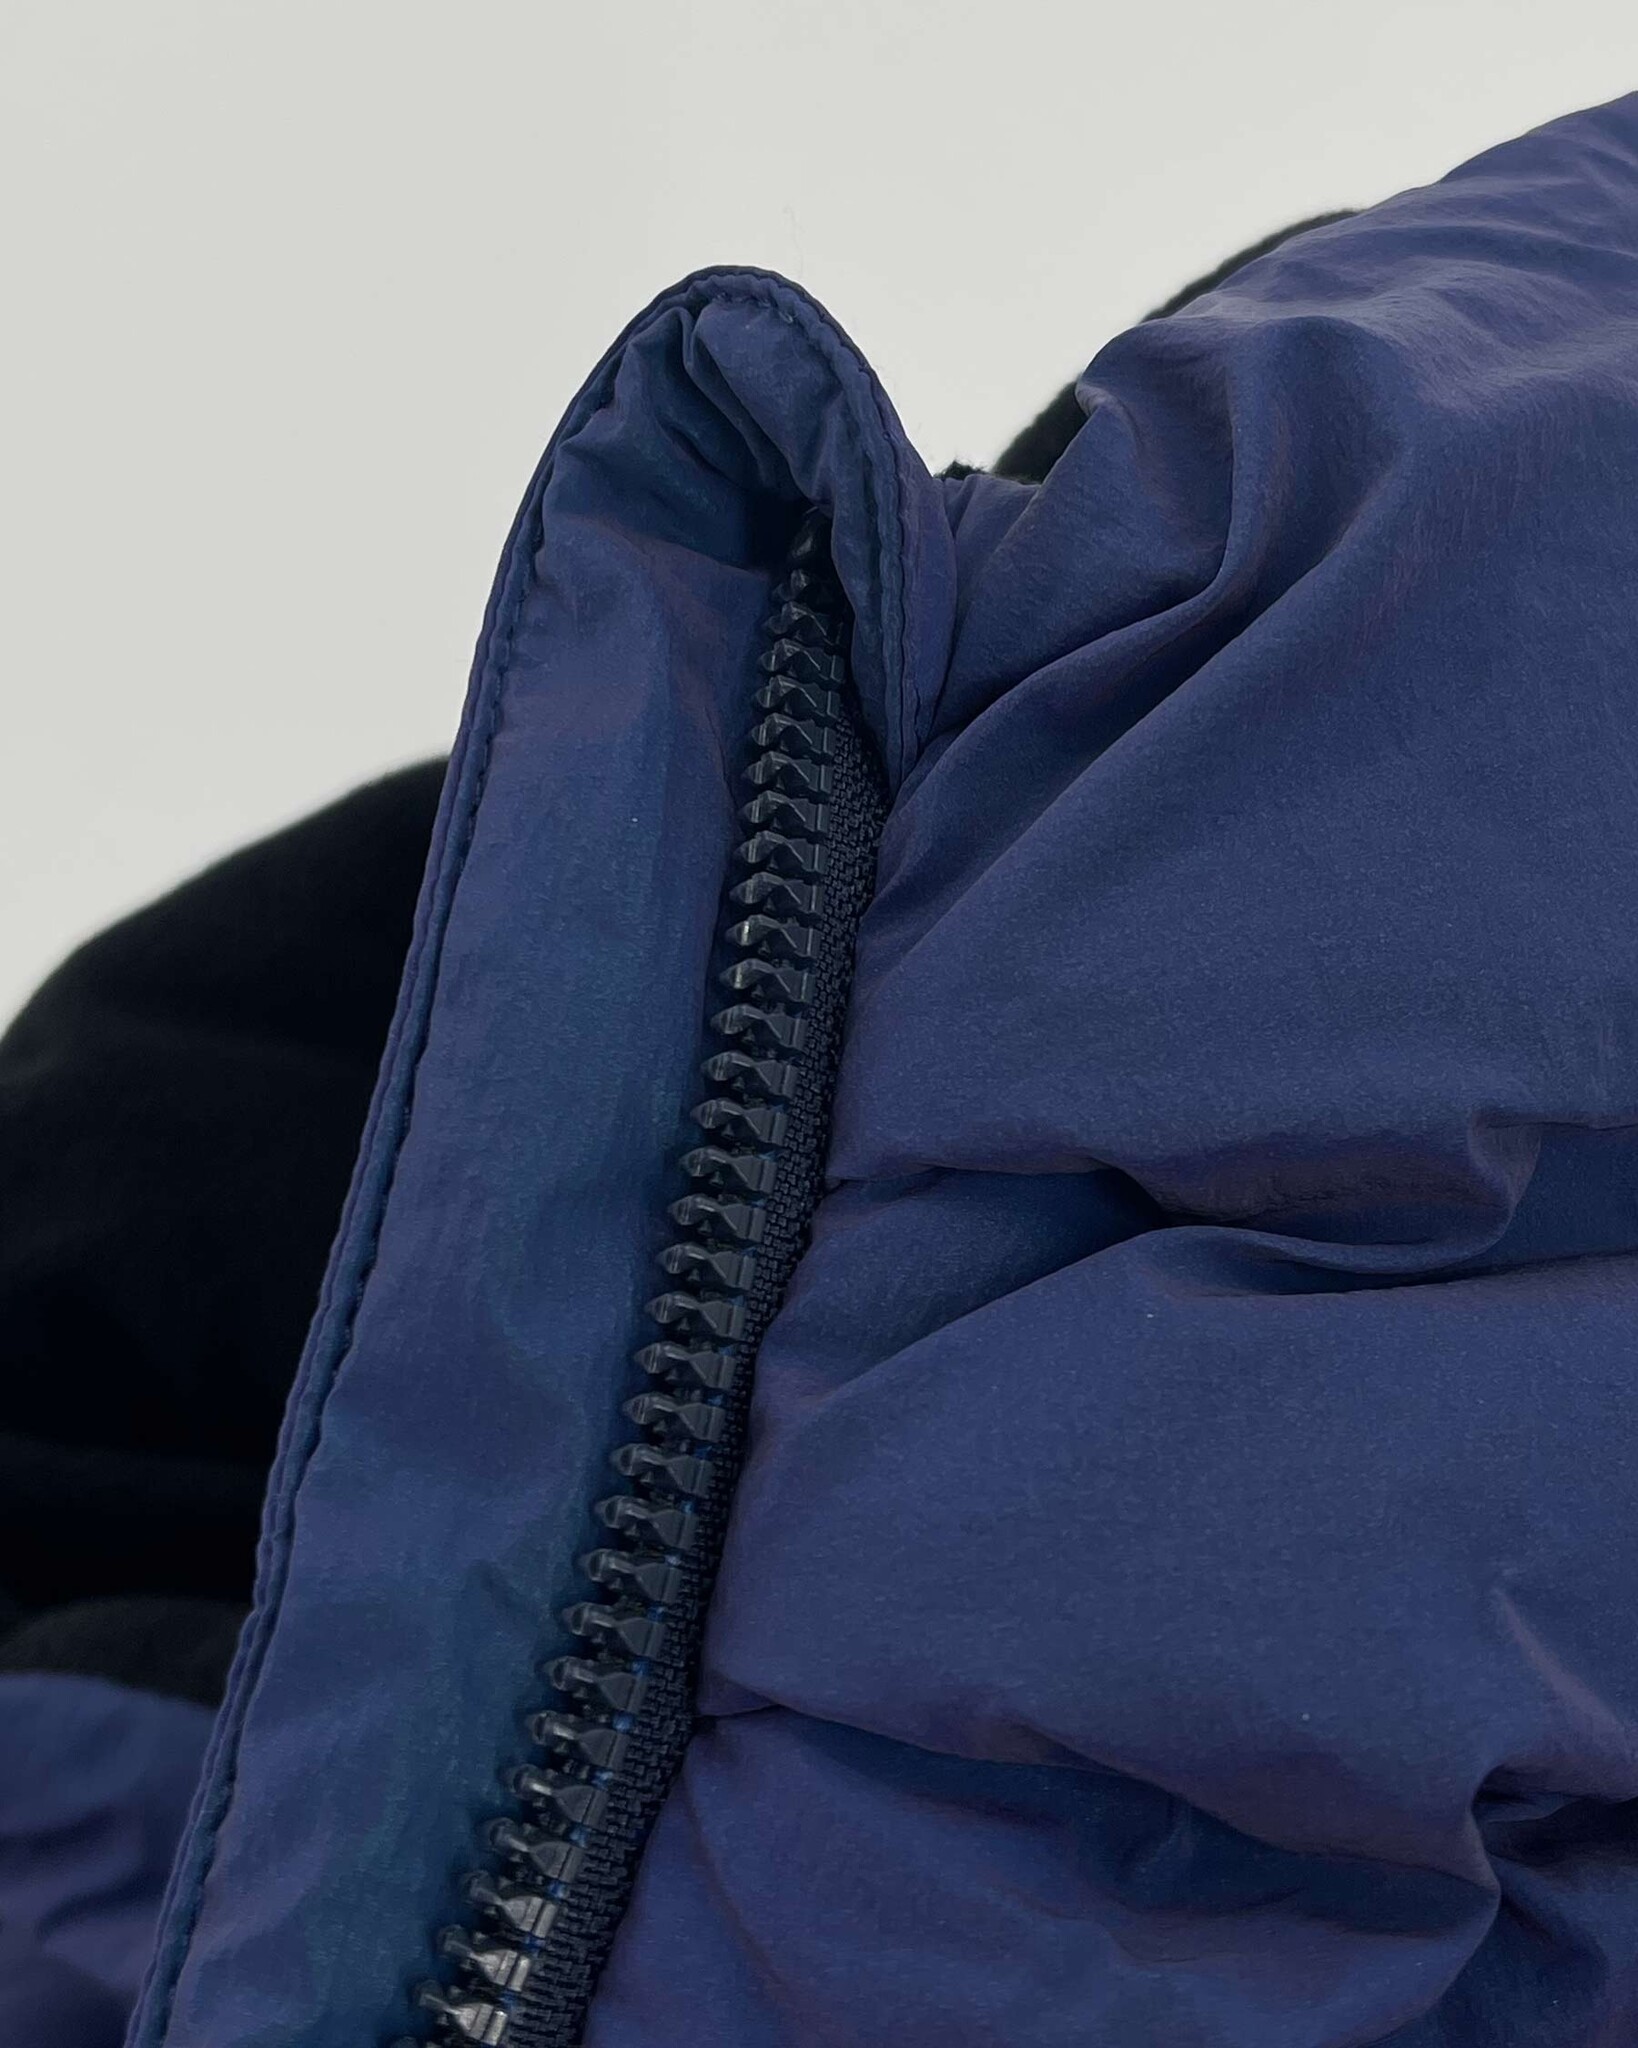 Puffer parka with 100% recycled fabric, REPREVE®  filling and water repelent finish